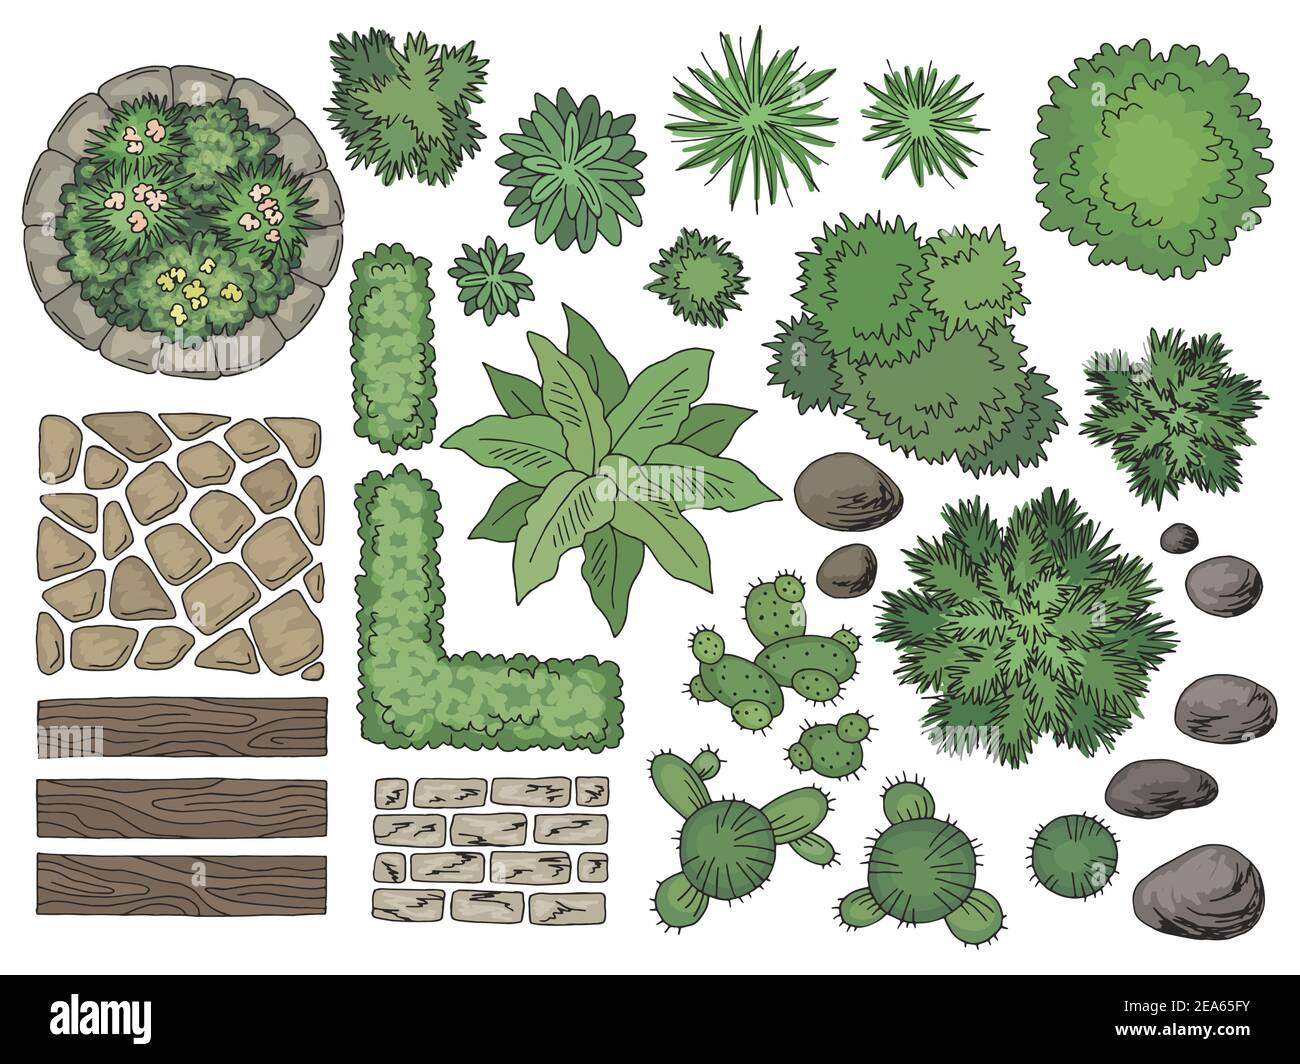 Landscape architect design element set color top sketch aerial view isolated illustration vector Stock Vector